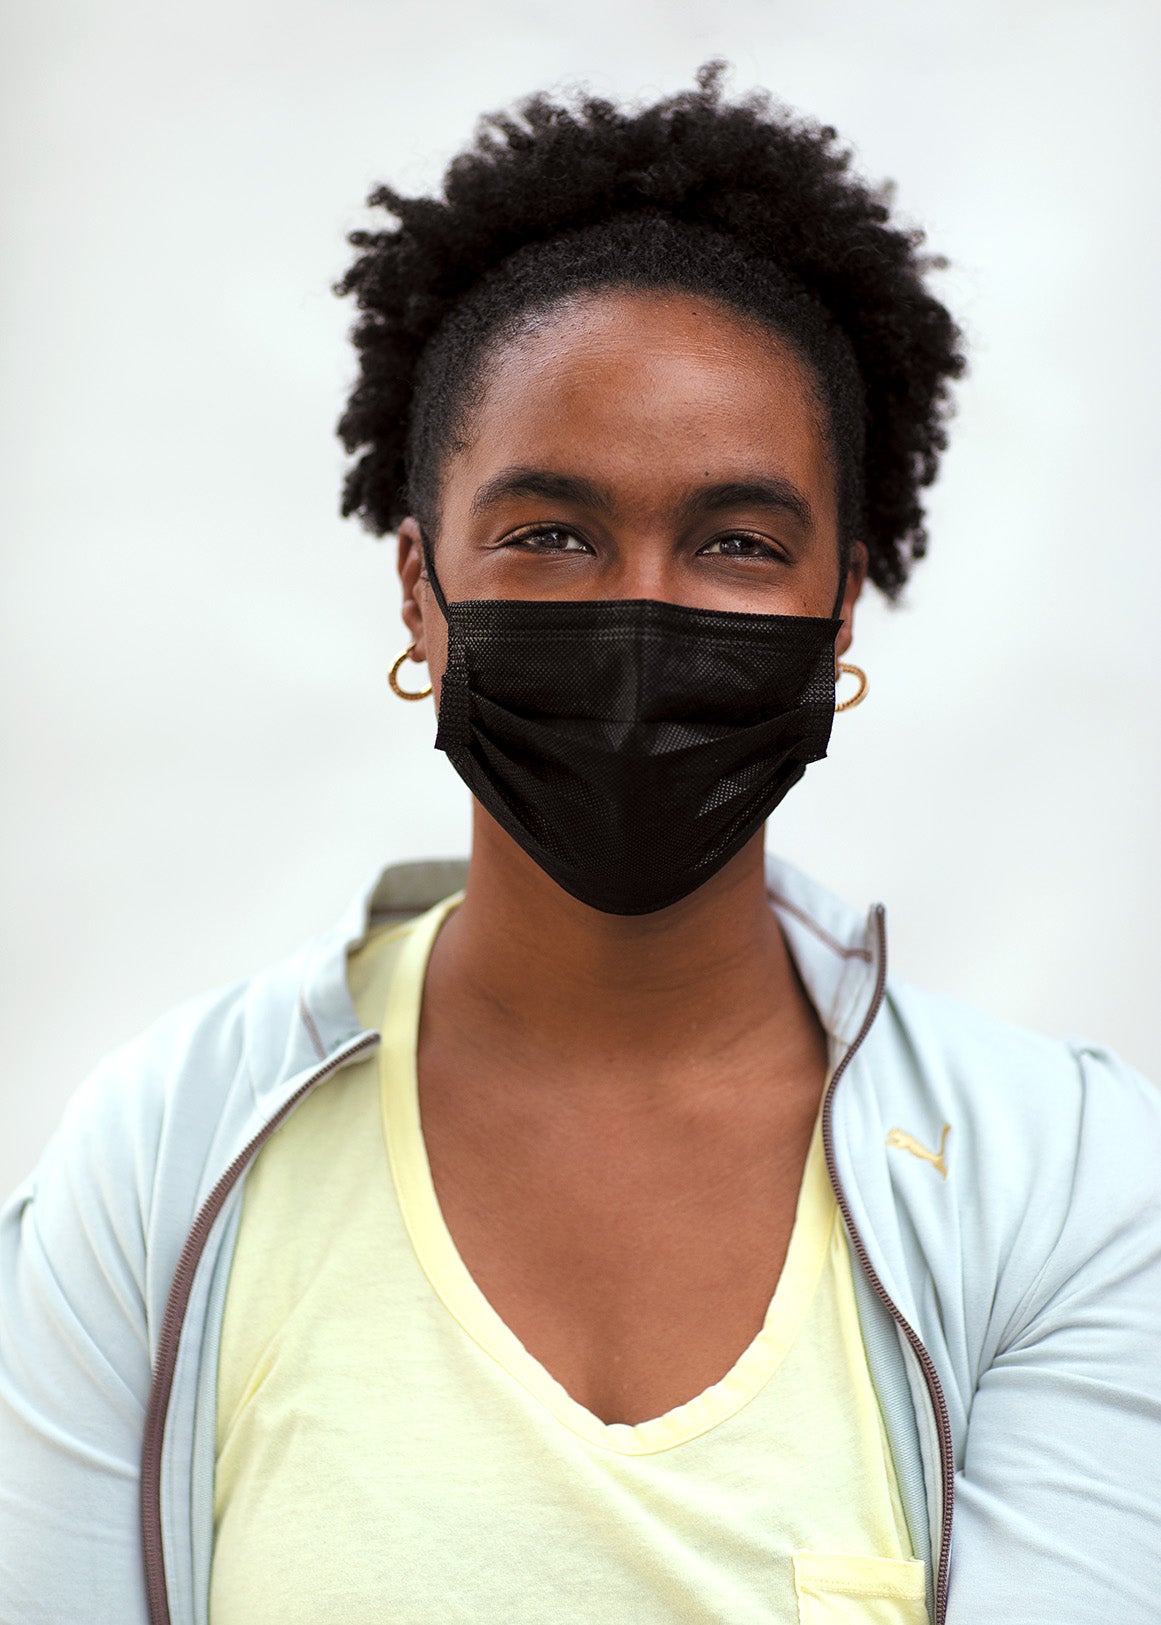 HODAN BULHAN wearing a face mask standing against white background.